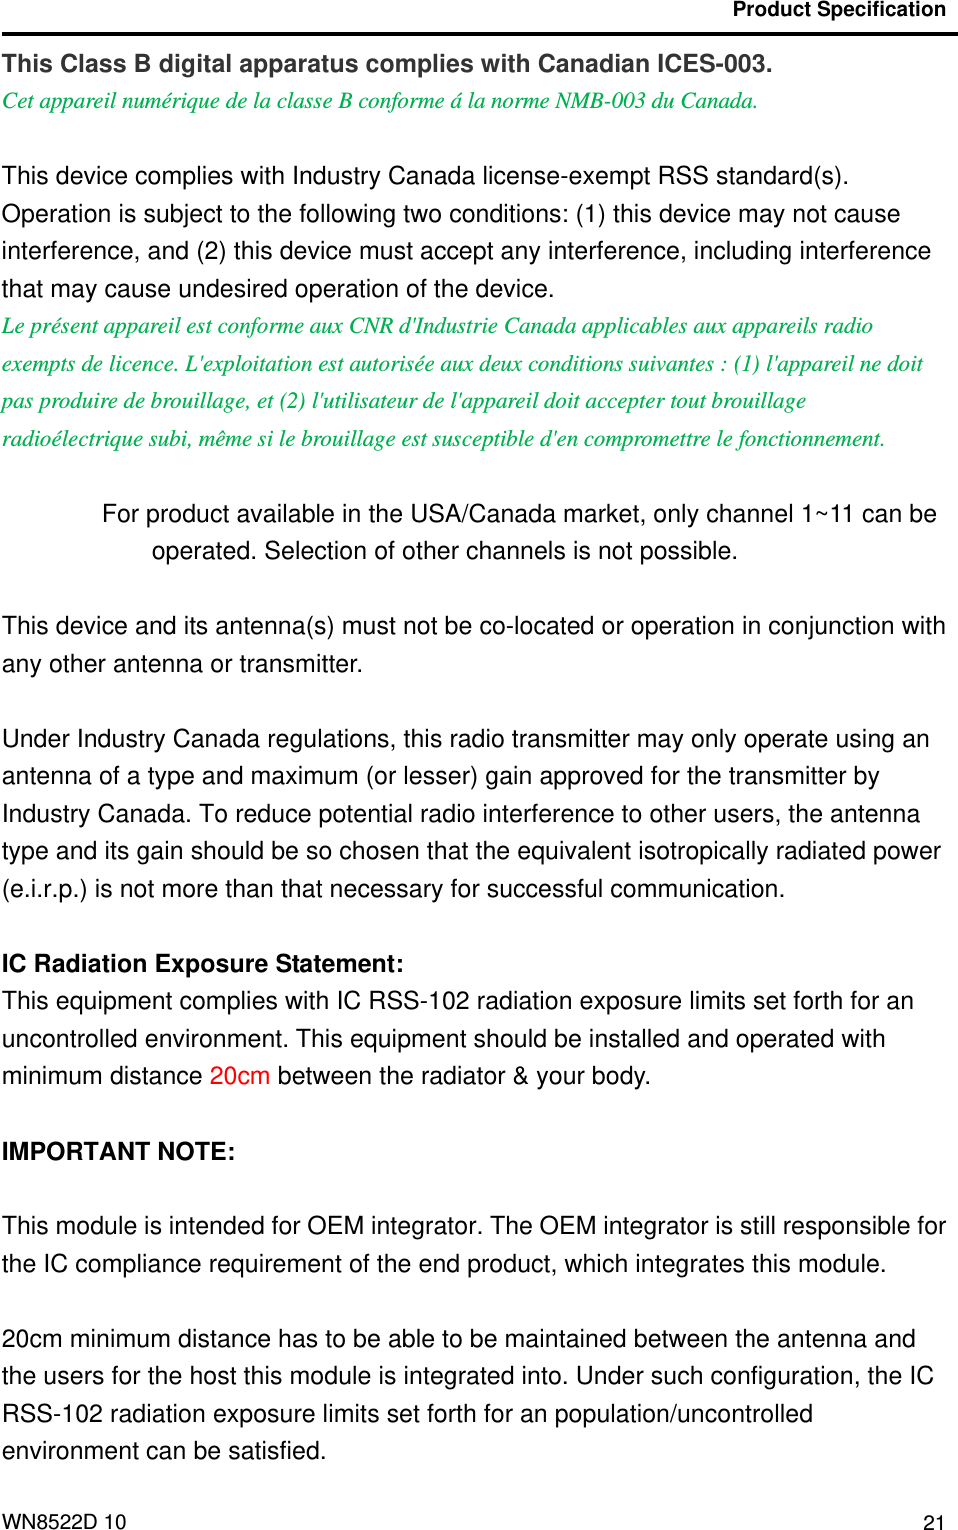                                           Product Specification  WN8522D 10  21This Class B digital apparatus complies with Canadian ICES-003. Cet appareil numérique de la classe B conforme á la norme NMB-003 du Canada.  This device complies with Industry Canada license-exempt RSS standard(s). Operation is subject to the following two conditions: (1) this device may not cause interference, and (2) this device must accept any interference, including interference that may cause undesired operation of the device. Le présent appareil est conforme aux CNR d&apos;Industrie Canada applicables aux appareils radio exempts de licence. L&apos;exploitation est autorisée aux deux conditions suivantes : (1) l&apos;appareil ne doit pas produire de brouillage, et (2) l&apos;utilisateur de l&apos;appareil doit accepter tout brouillage radioélectrique subi, même si le brouillage est susceptible d&apos;en compromettre le fonctionnement.  For product available in the USA/Canada market, only channel 1~11 can be operated. Selection of other channels is not possible.  This device and its antenna(s) must not be co-located or operation in conjunction with any other antenna or transmitter.  Under Industry Canada regulations, this radio transmitter may only operate using an antenna of a type and maximum (or lesser) gain approved for the transmitter by Industry Canada. To reduce potential radio interference to other users, the antenna type and its gain should be so chosen that the equivalent isotropically radiated power (e.i.r.p.) is not more than that necessary for successful communication.    IC Radiation Exposure Statement: This equipment complies with IC RSS-102 radiation exposure limits set forth for an uncontrolled environment. This equipment should be installed and operated with minimum distance 20cm between the radiator &amp; your body.  IMPORTANT NOTE:  This module is intended for OEM integrator. The OEM integrator is still responsible for the IC compliance requirement of the end product, which integrates this module.  20cm minimum distance has to be able to be maintained between the antenna and the users for the host this module is integrated into. Under such configuration, the IC RSS-102 radiation exposure limits set forth for an population/uncontrolled environment can be satisfied.   